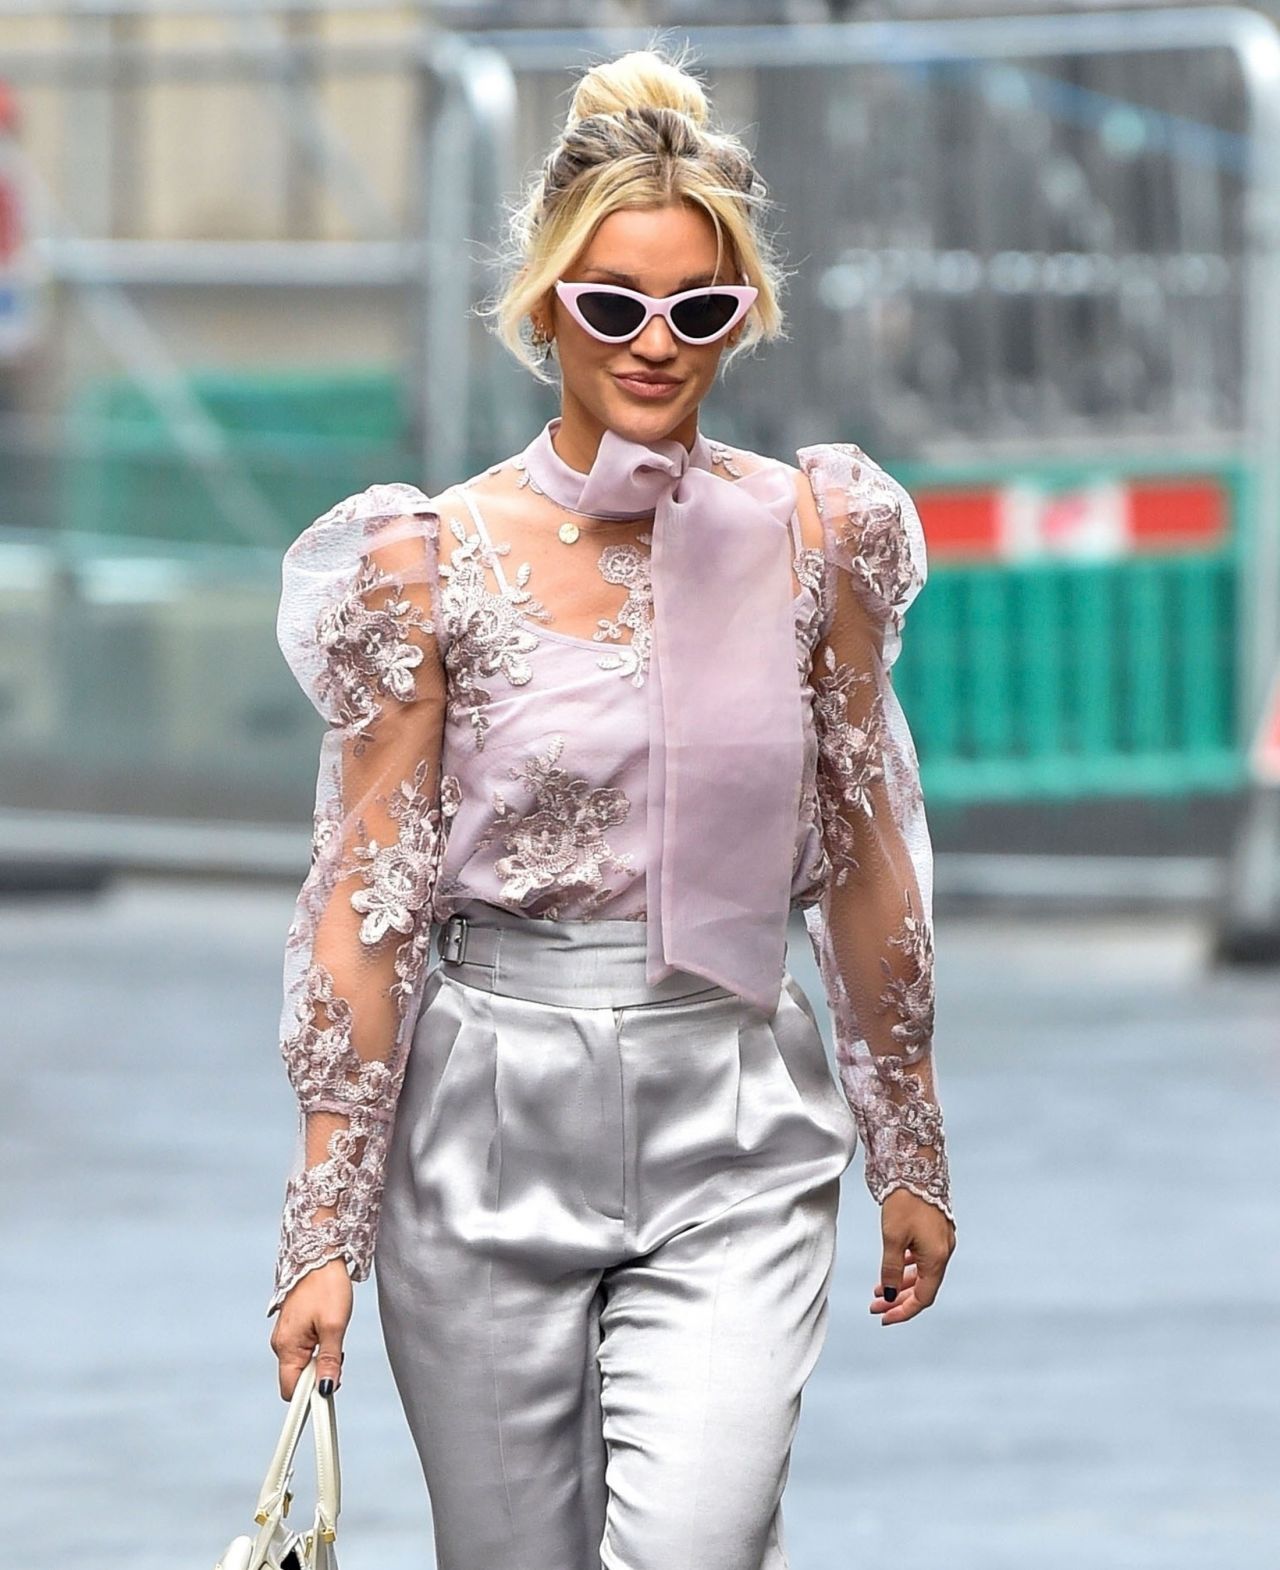 ashley-roberts-in-a-statement-sheer-blouse-and-high-waisted-satin-trousers-london-11-09-2020-3.jpg